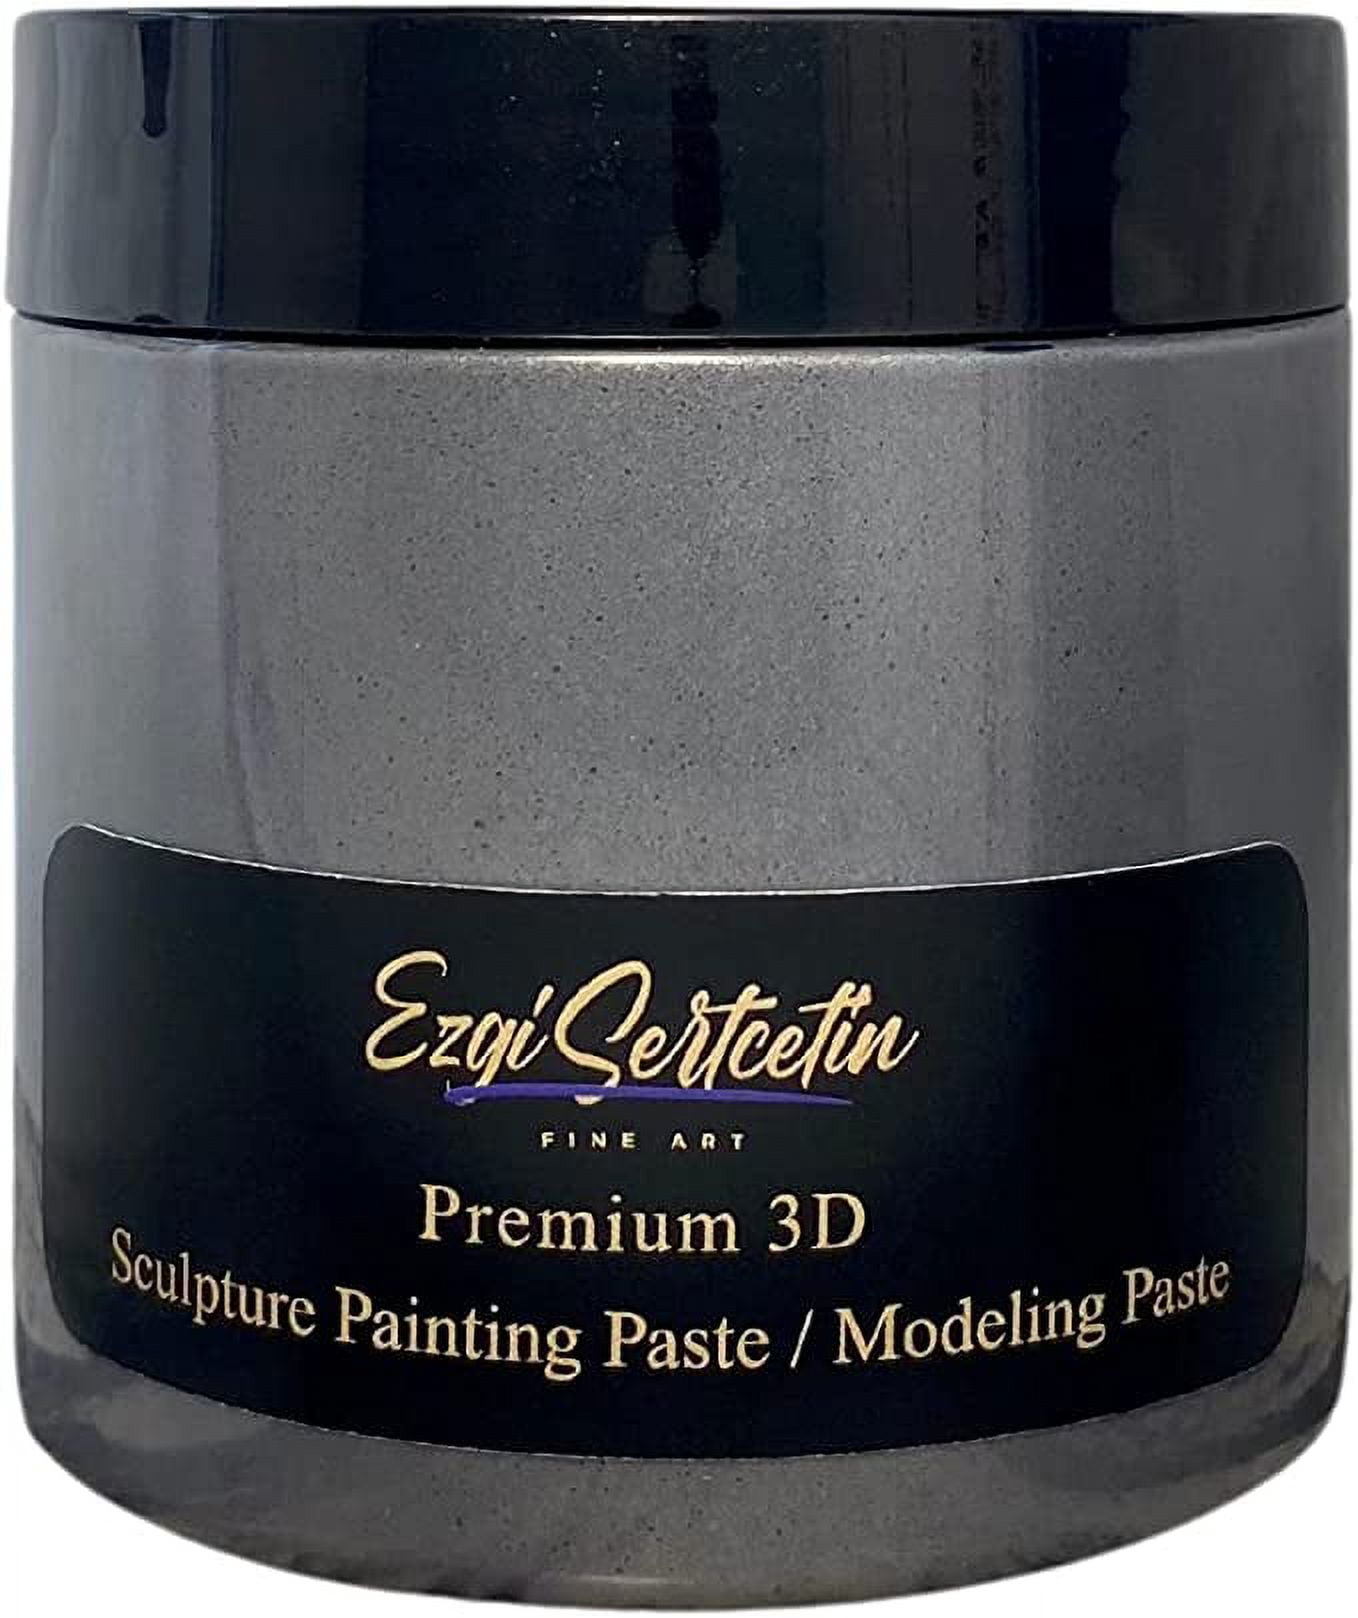 3D Sculpture Painting Paste, Modeling Paste, Decorative Plaster, Ready to  Use, Unique Metallic Pearl and Neon Colors, Ideal for Artwork, Stencil, Flowers, Texture and Art Relief, 6 oz